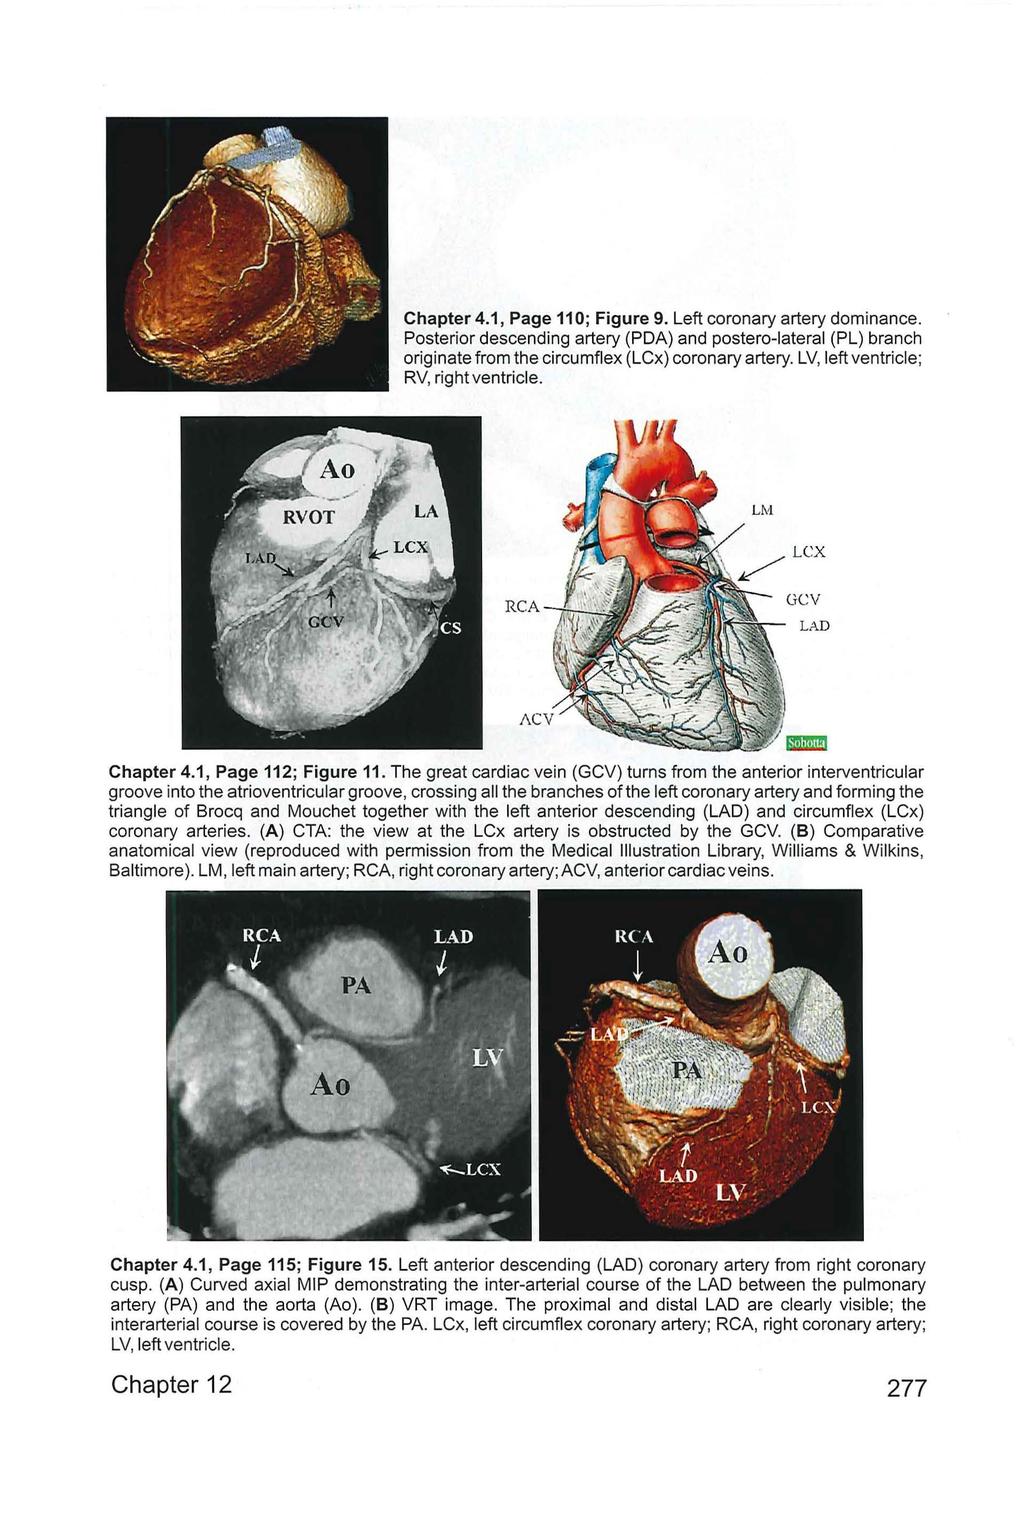 Chapter 4.1, Page 11 0; Figure 9. Left coronary artery dominance. Posterior descending artery (PDA) and postero-lateral (PL) branch originate from the circumflex (LCx) coronary artery.